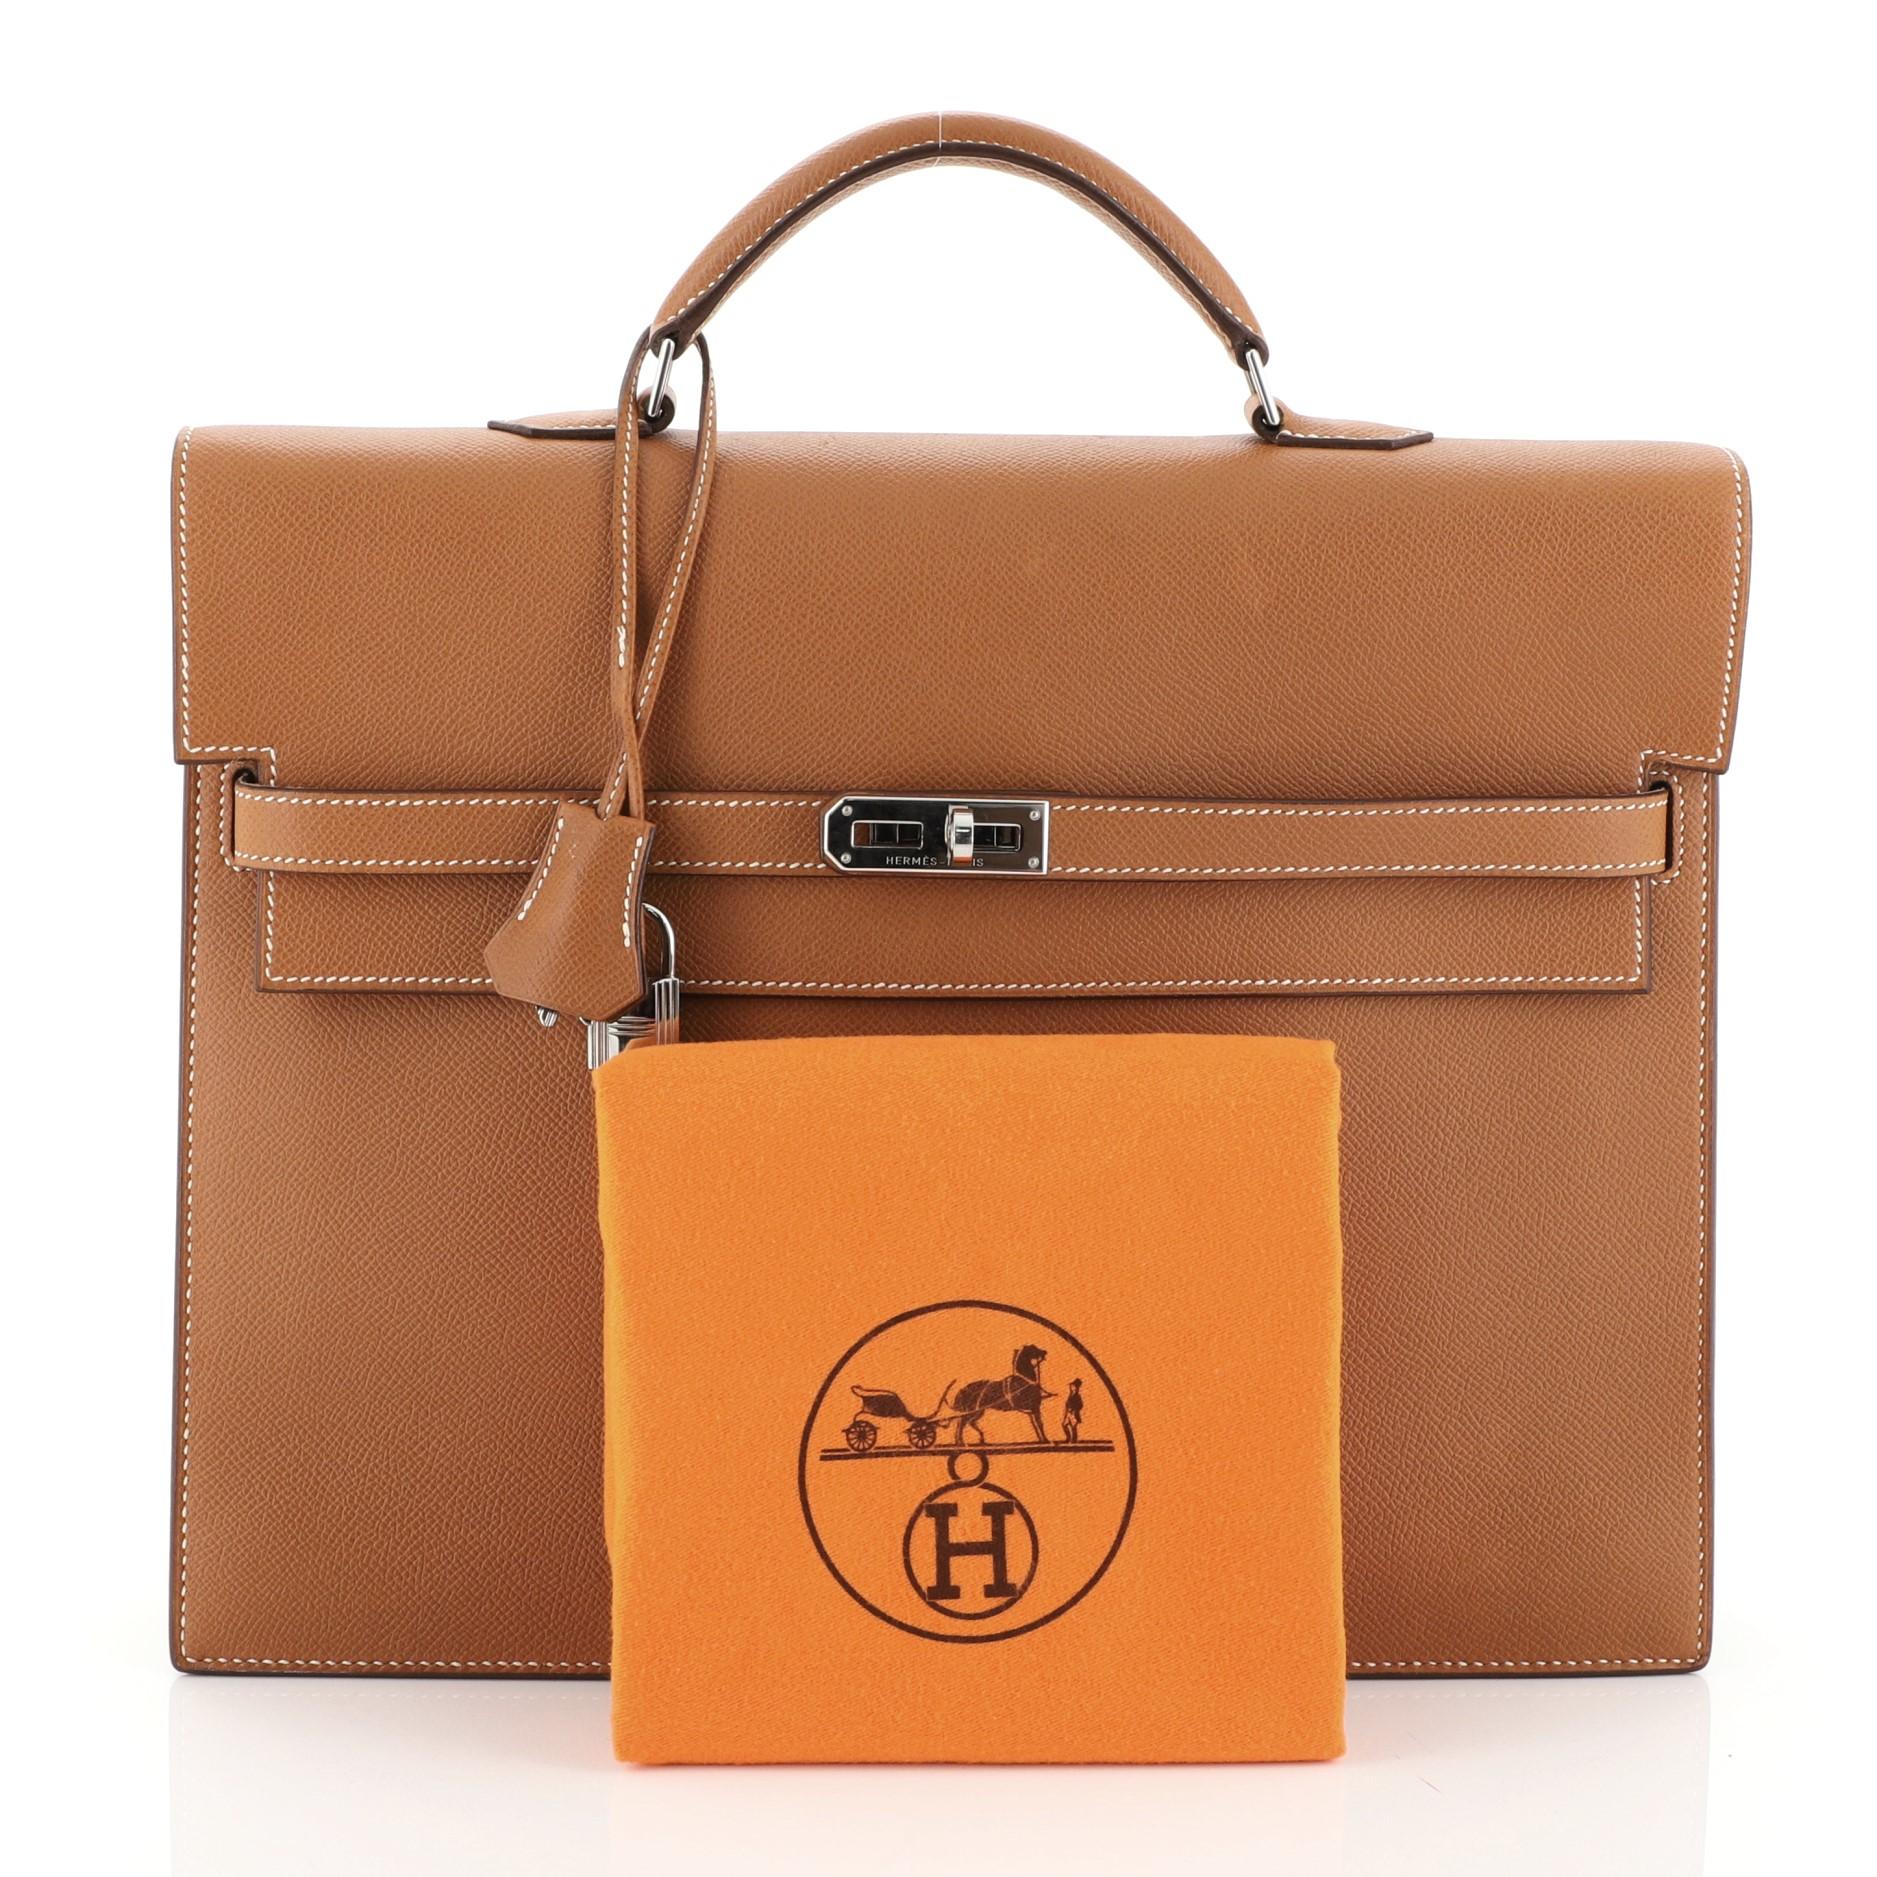 This Hermes Kelly Depeche Handbag Epsom 34, crafted in Cognac brown Epsom leather, features a single top handle, frontal flap, and palladium hardware. Its turn-lock closure opens to a Cognac brown raw leather interior. Date stamp reads: J Square